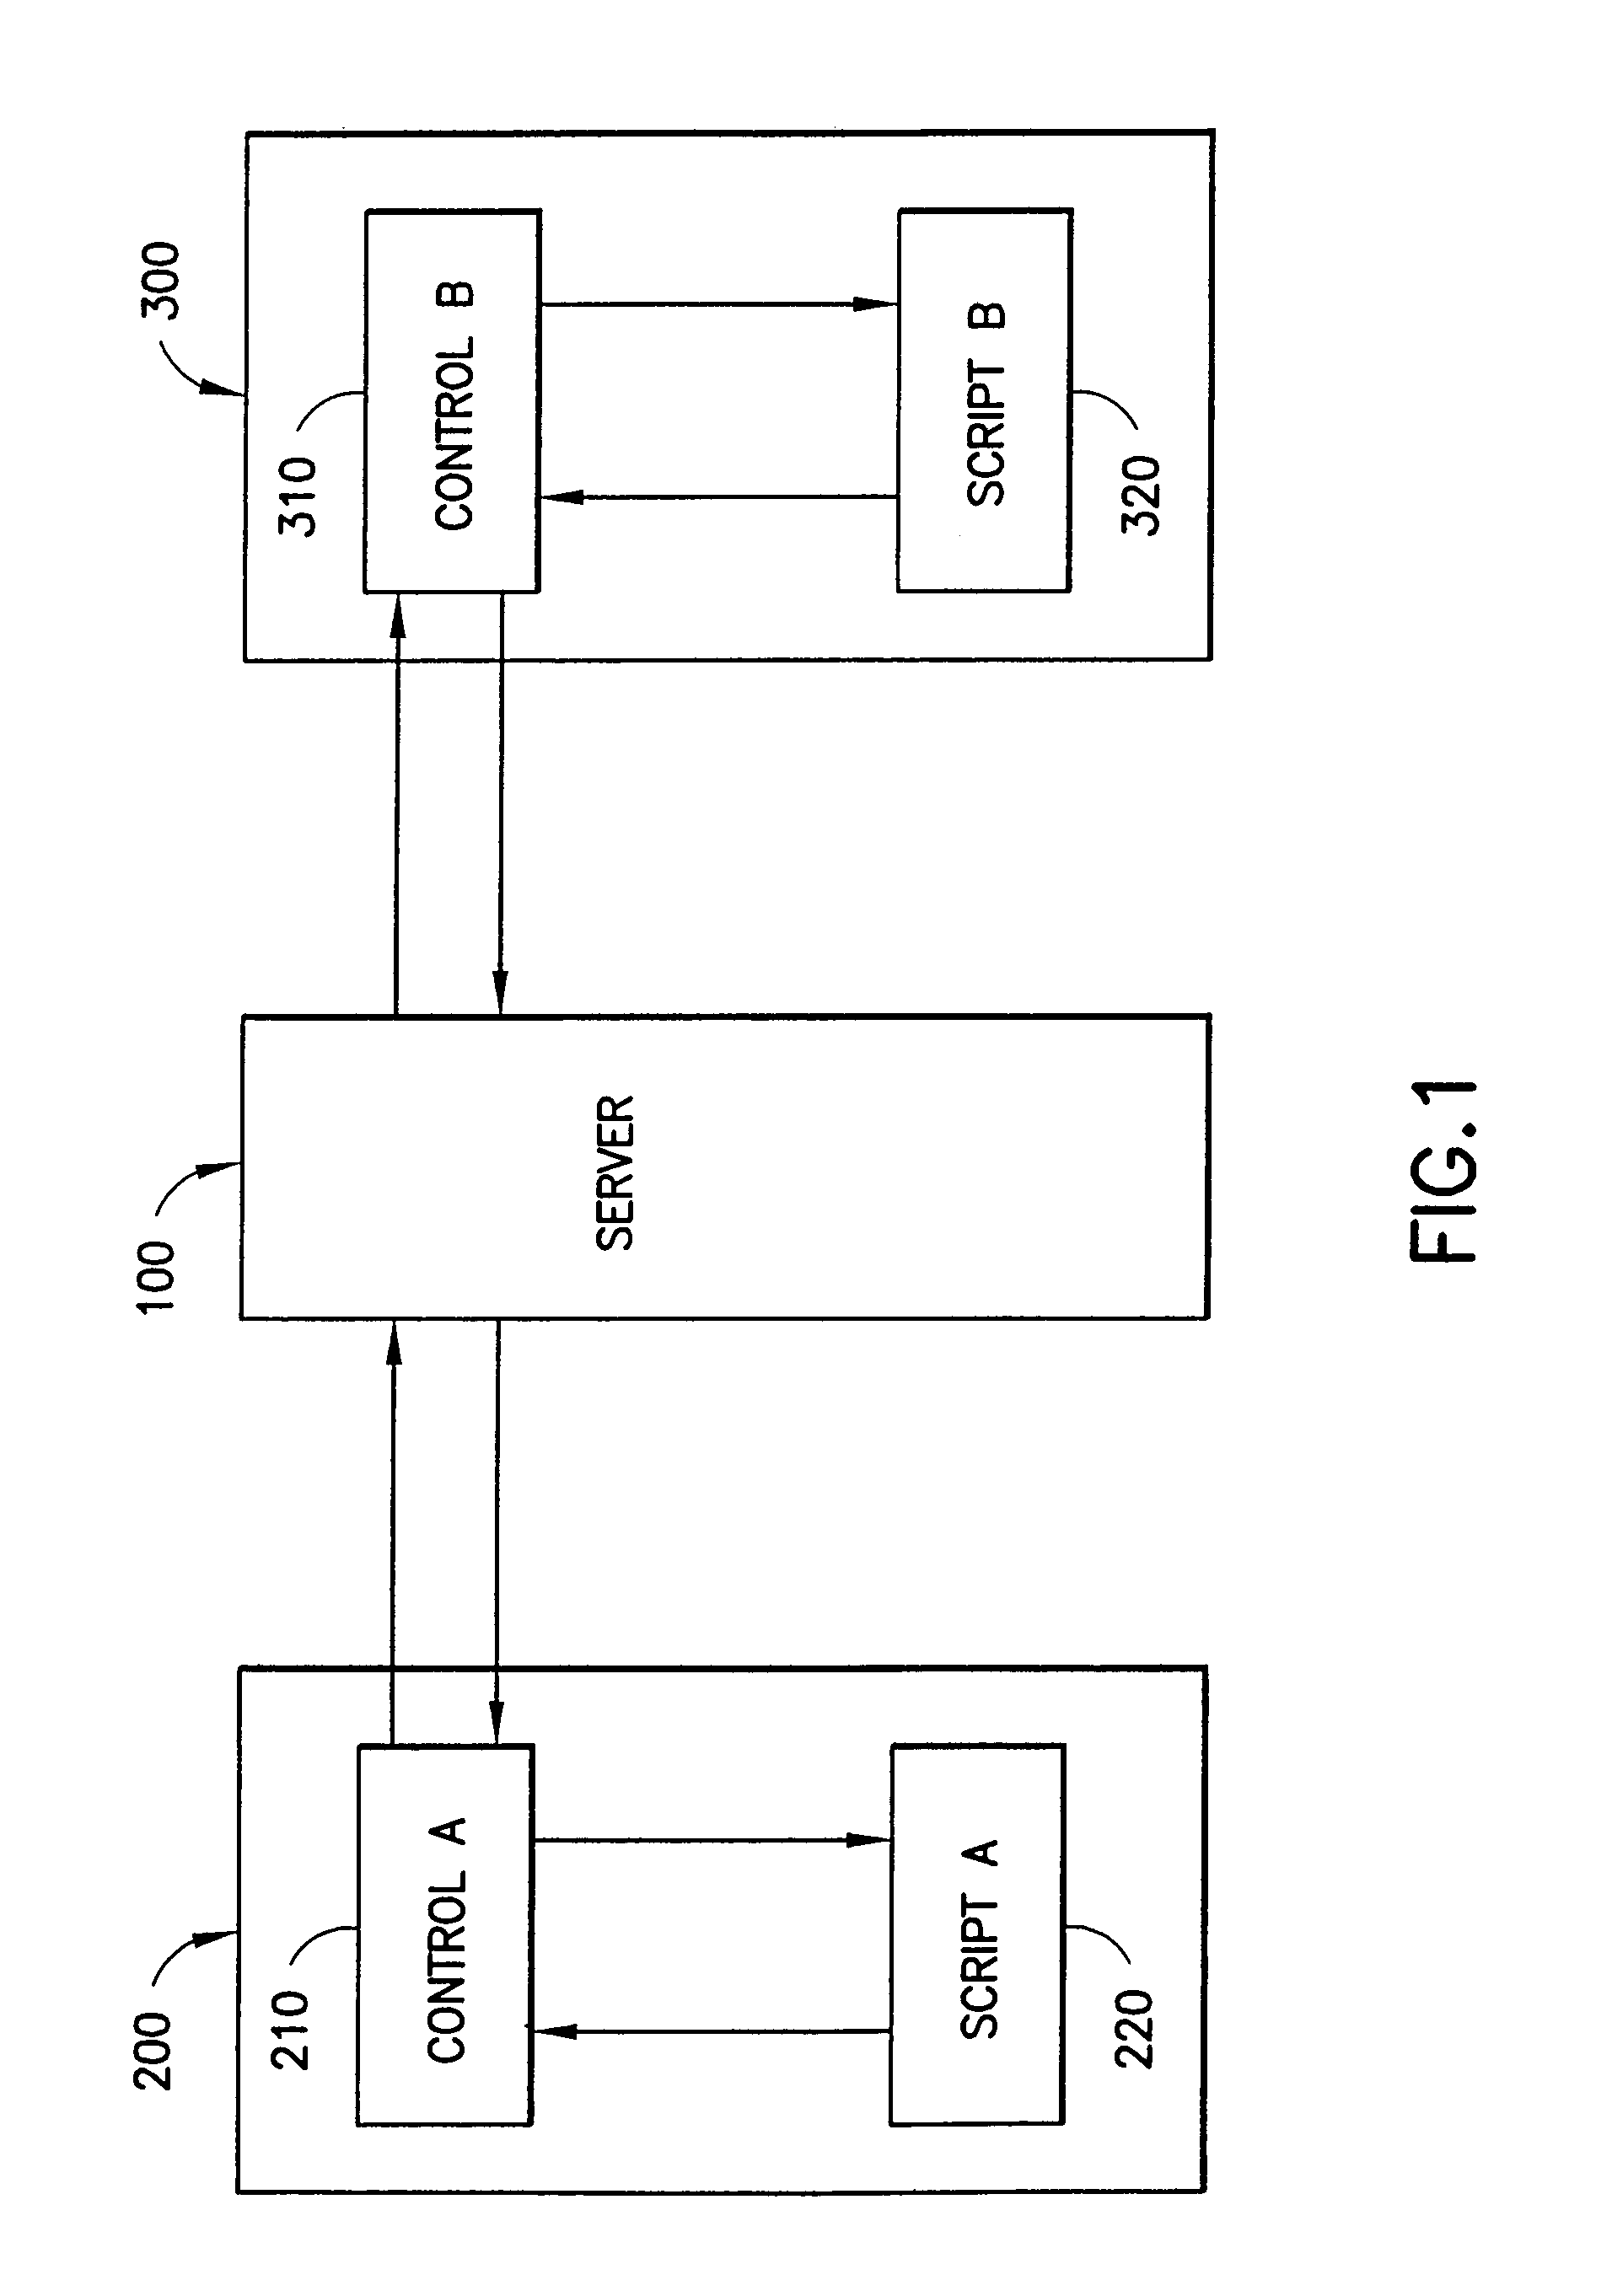 Method and system for enabling a script on a first computer to communicate and exchange data with a script on a second computer over a network